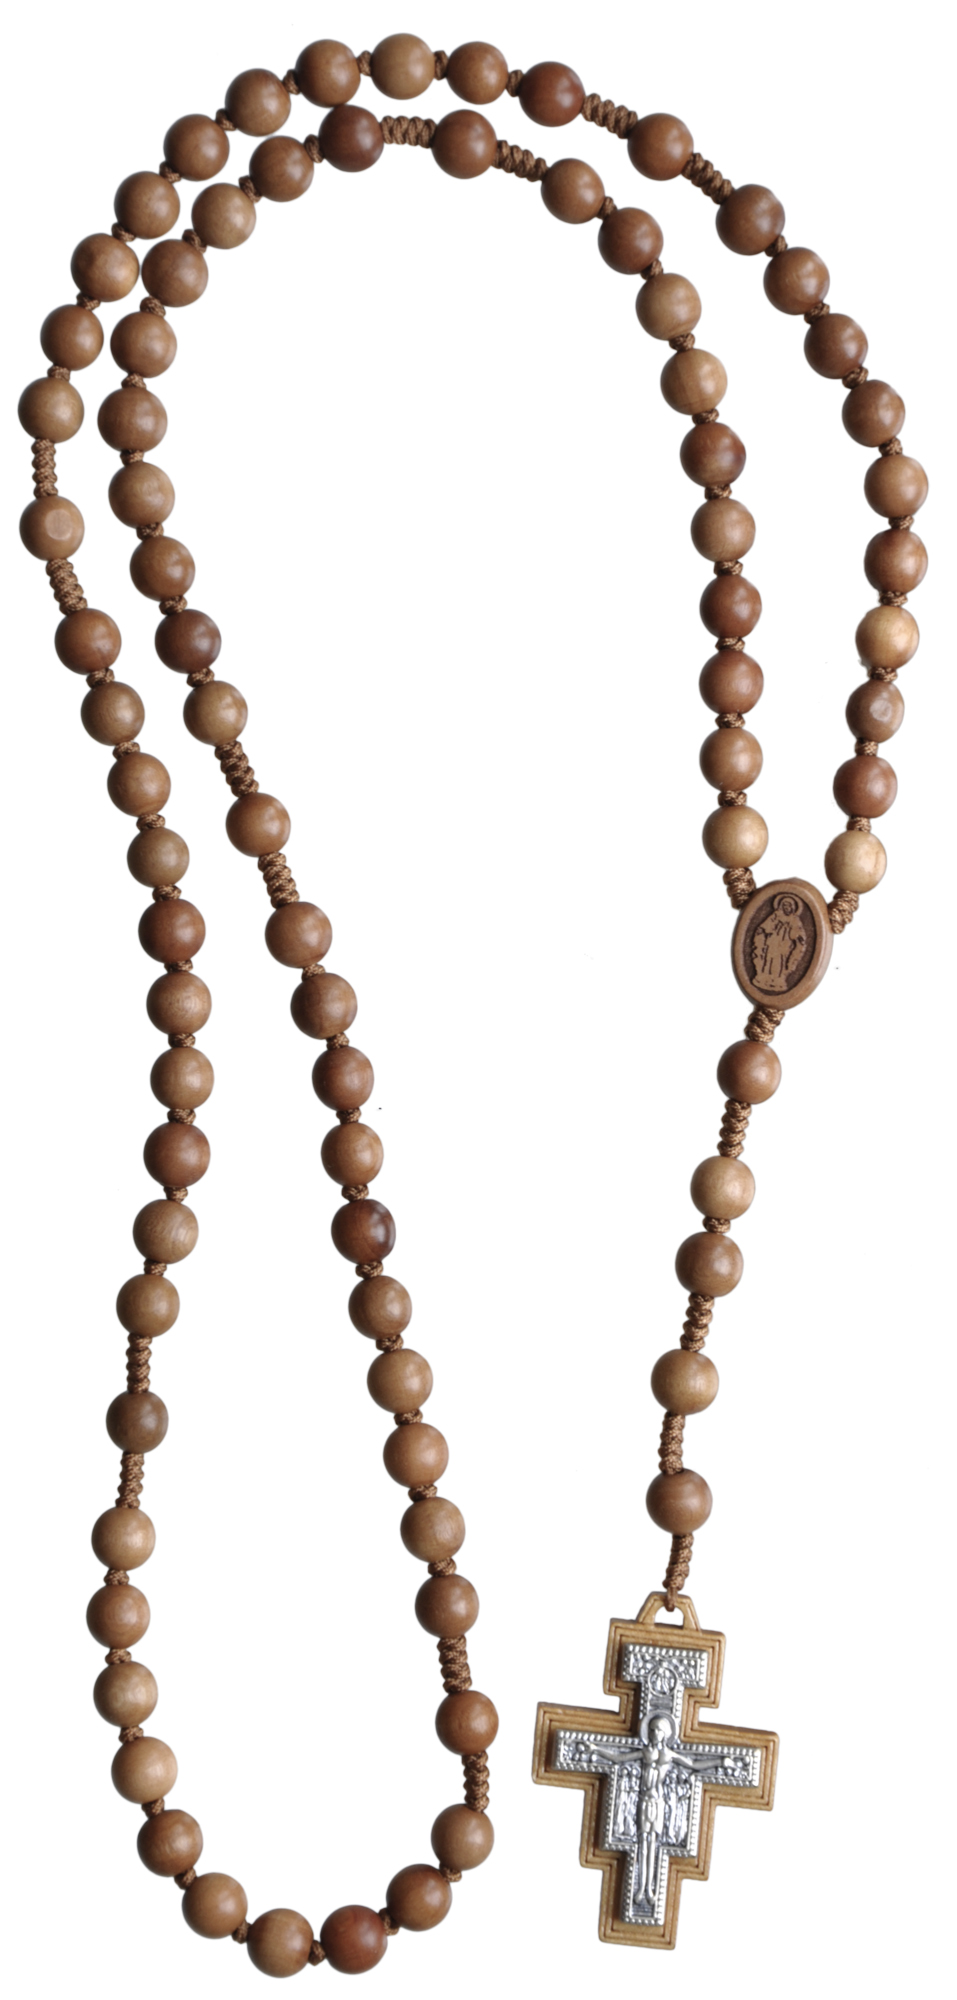 Franciscan Crown 7 decade rosewood type Rosary 